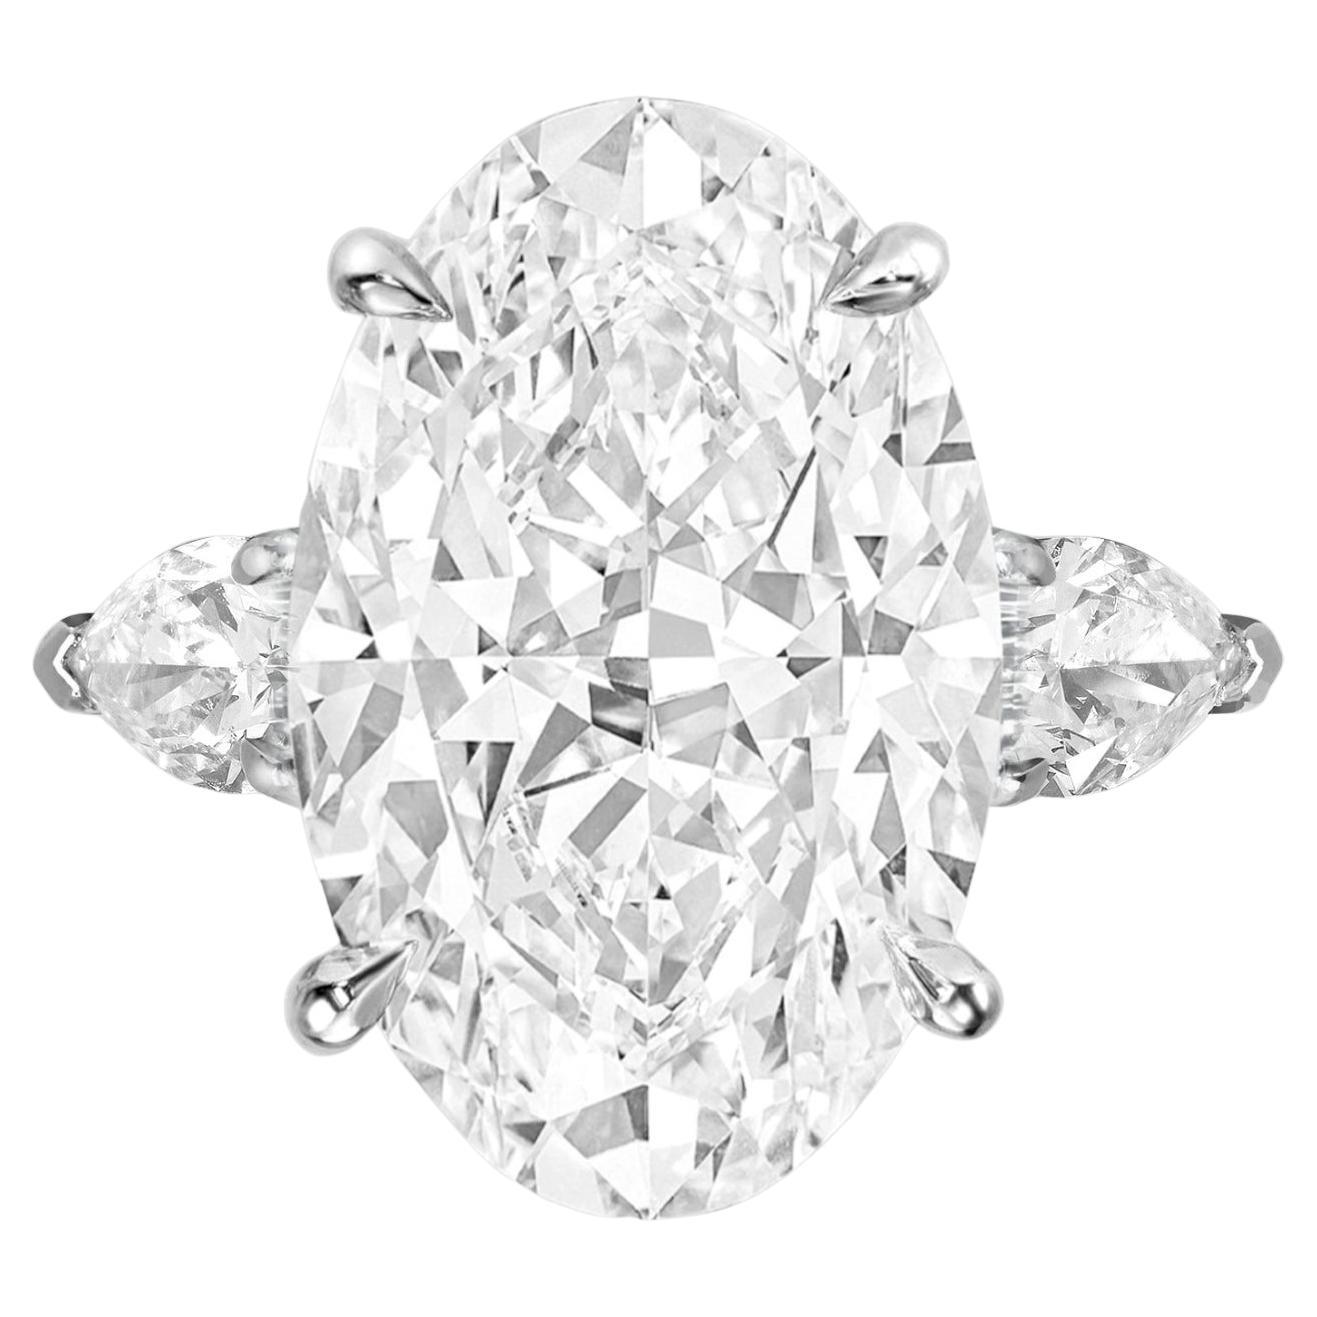 EXCEPTIONAL VVS1 Clarity GIA Certified 10 Carat Oval Diamond Platinum Ring For Sale